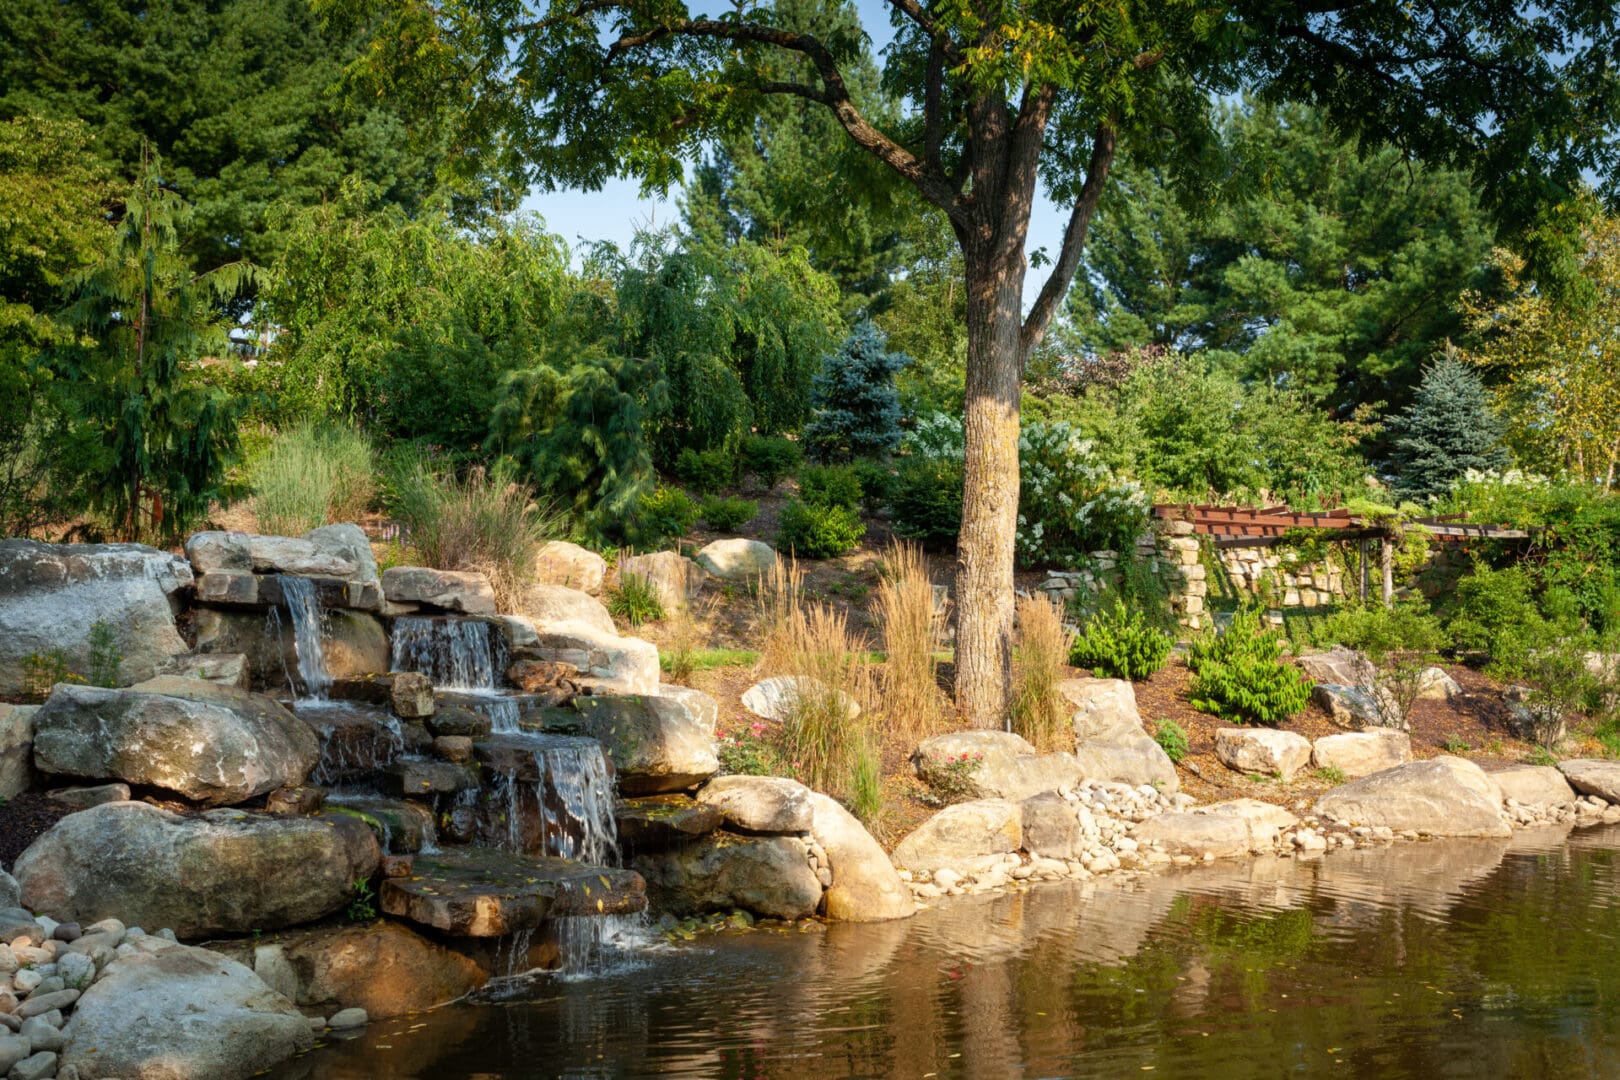 A tranquil pond, nestled amongst towering trees and adorned with natural rock formations, creating a picturesque water feature.